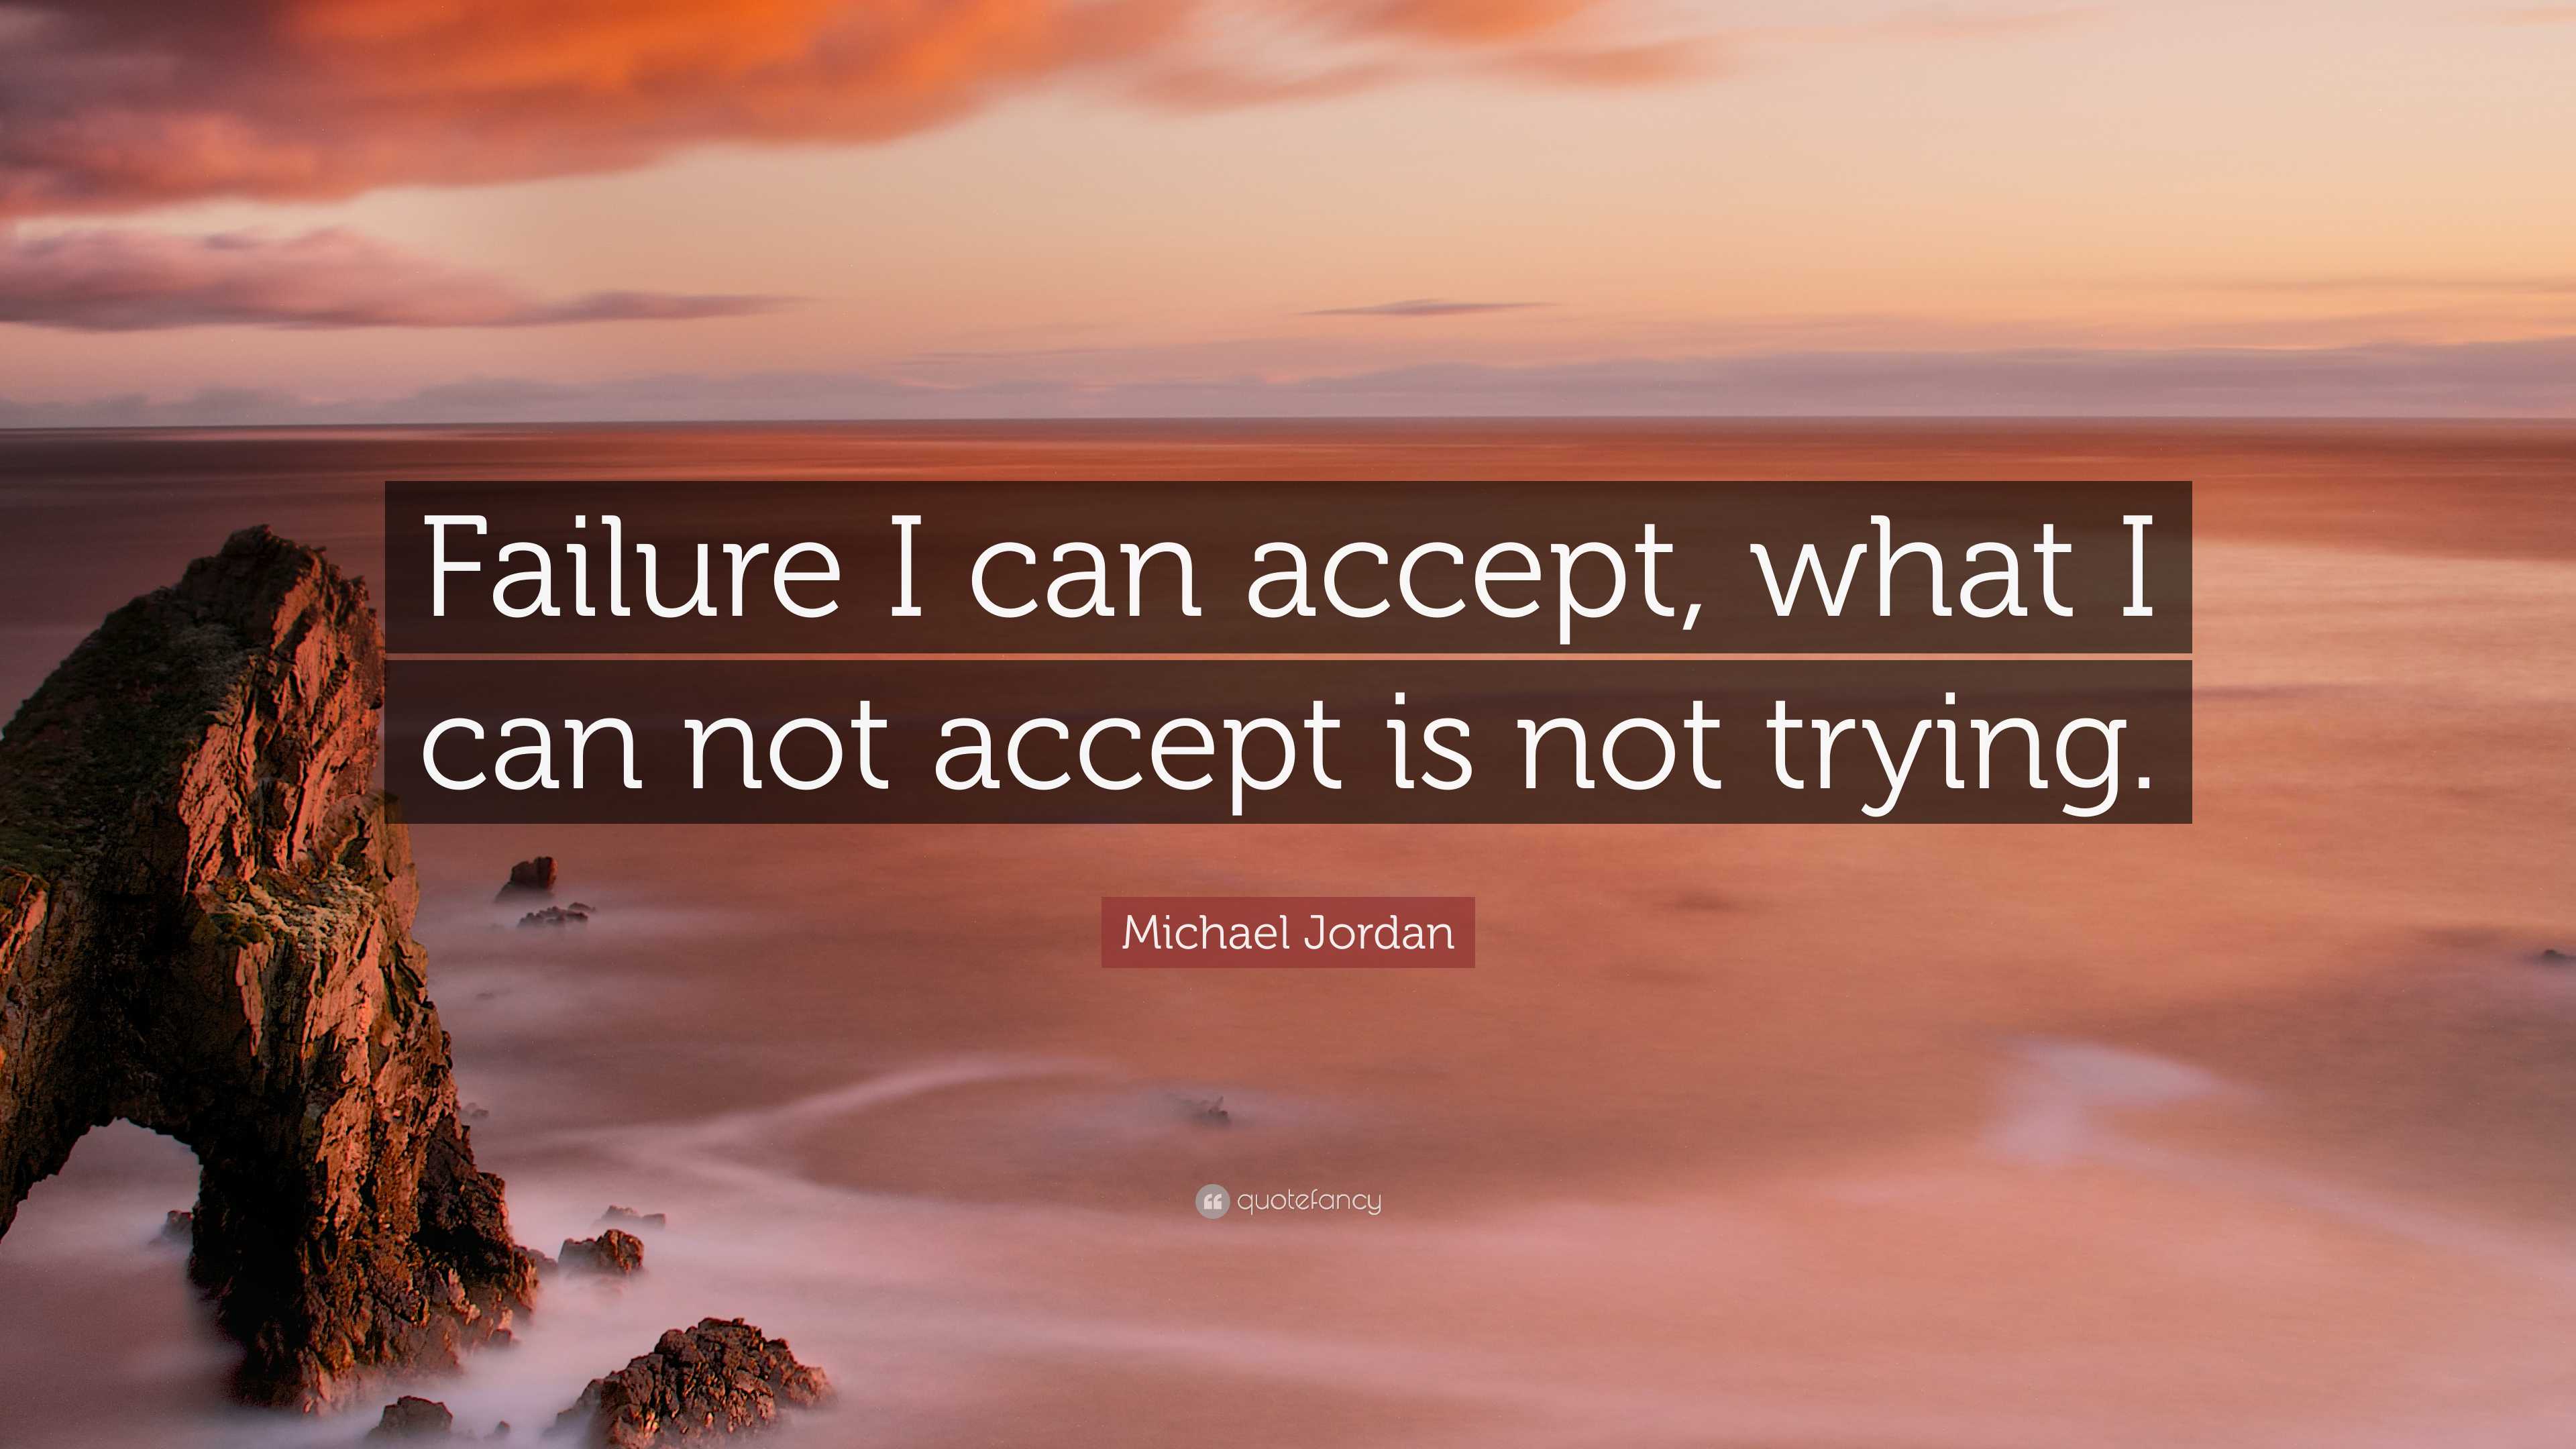 Michael Jordan Quote: “Failure I can accept, what I can not accept is ...